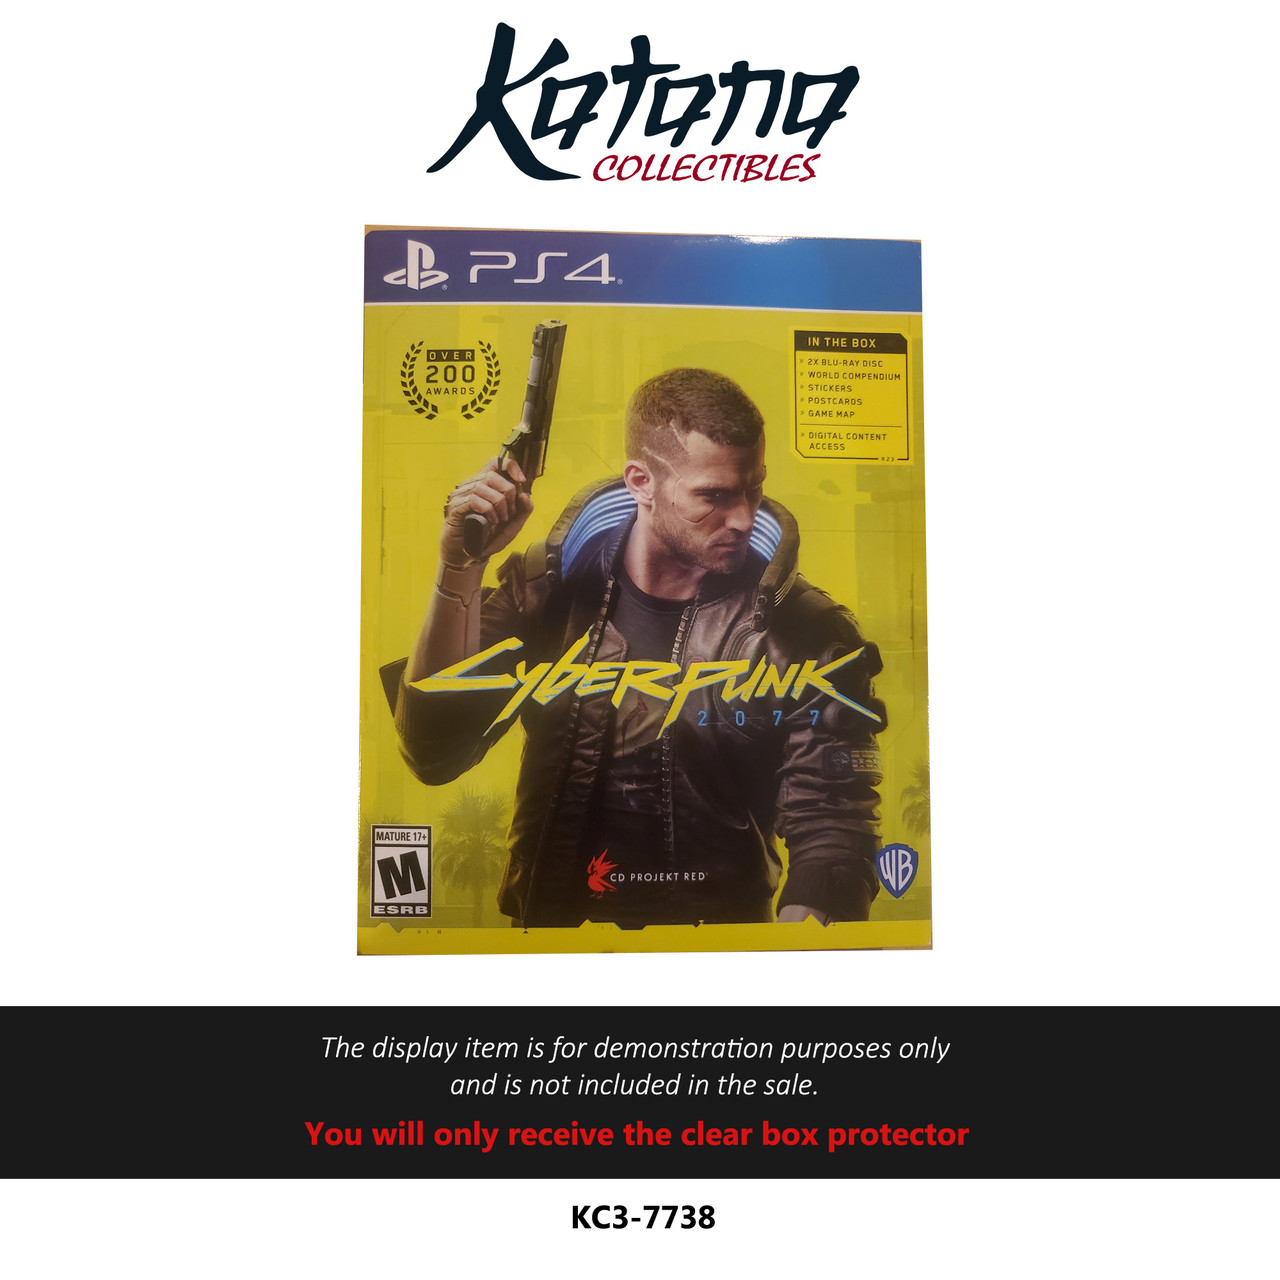 Katana Collectibles Protector For Cyberpunk 2077 in the box edition PS4